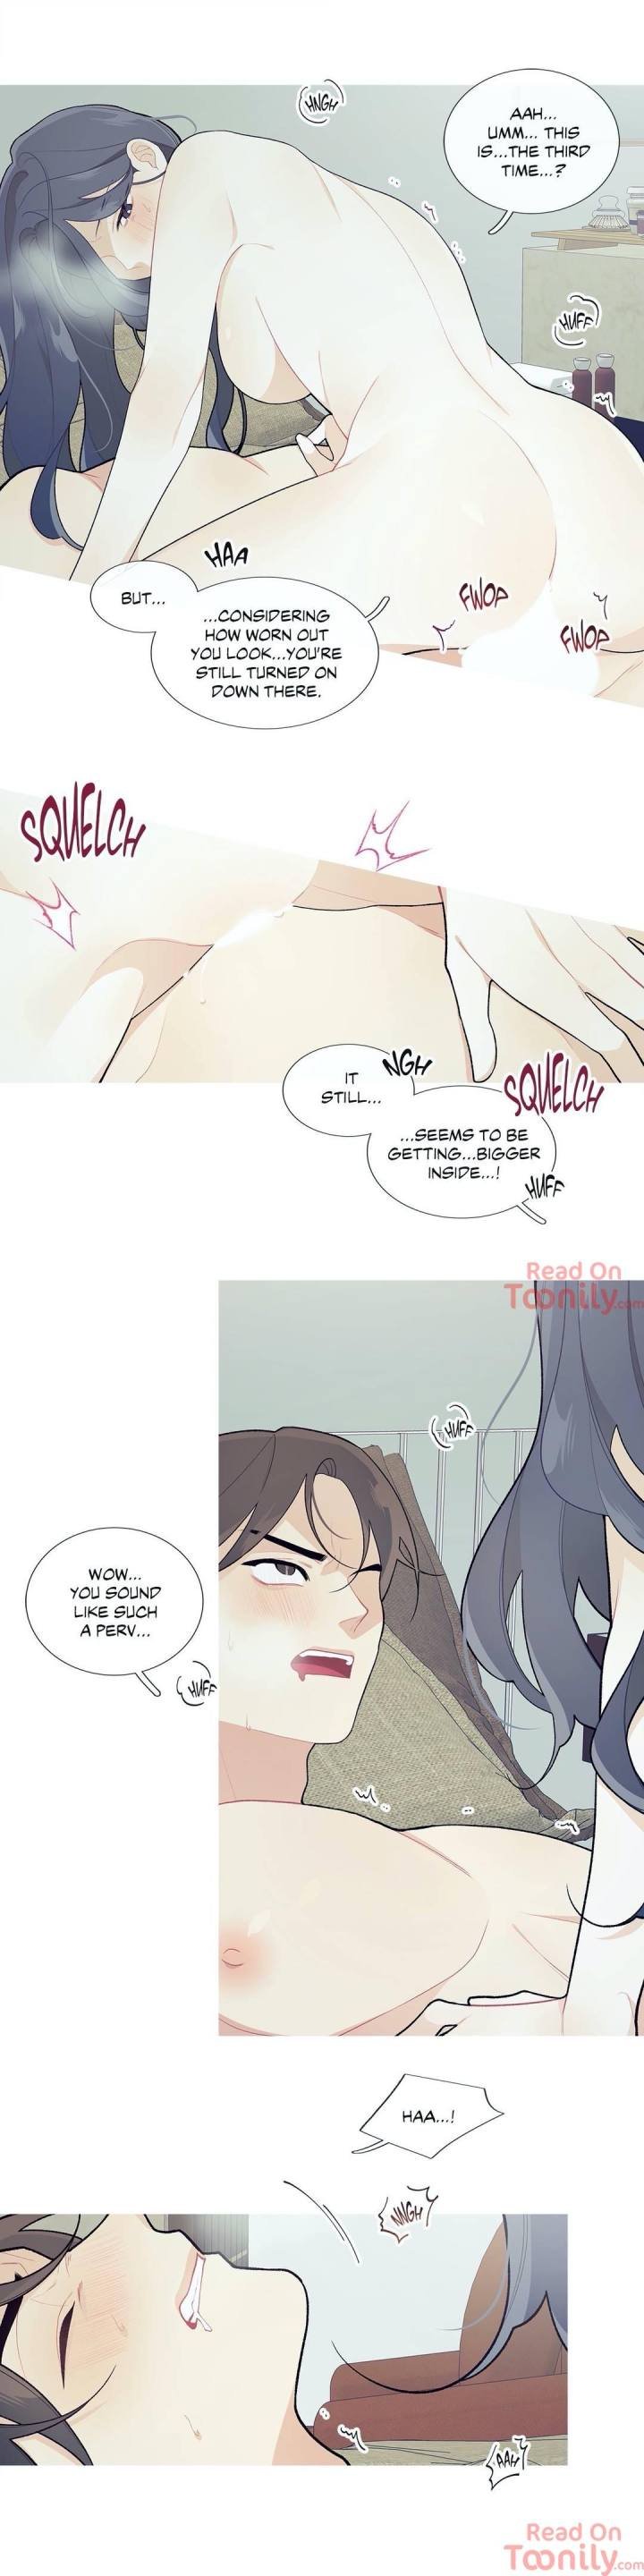 whats-going-on-chap-40-1